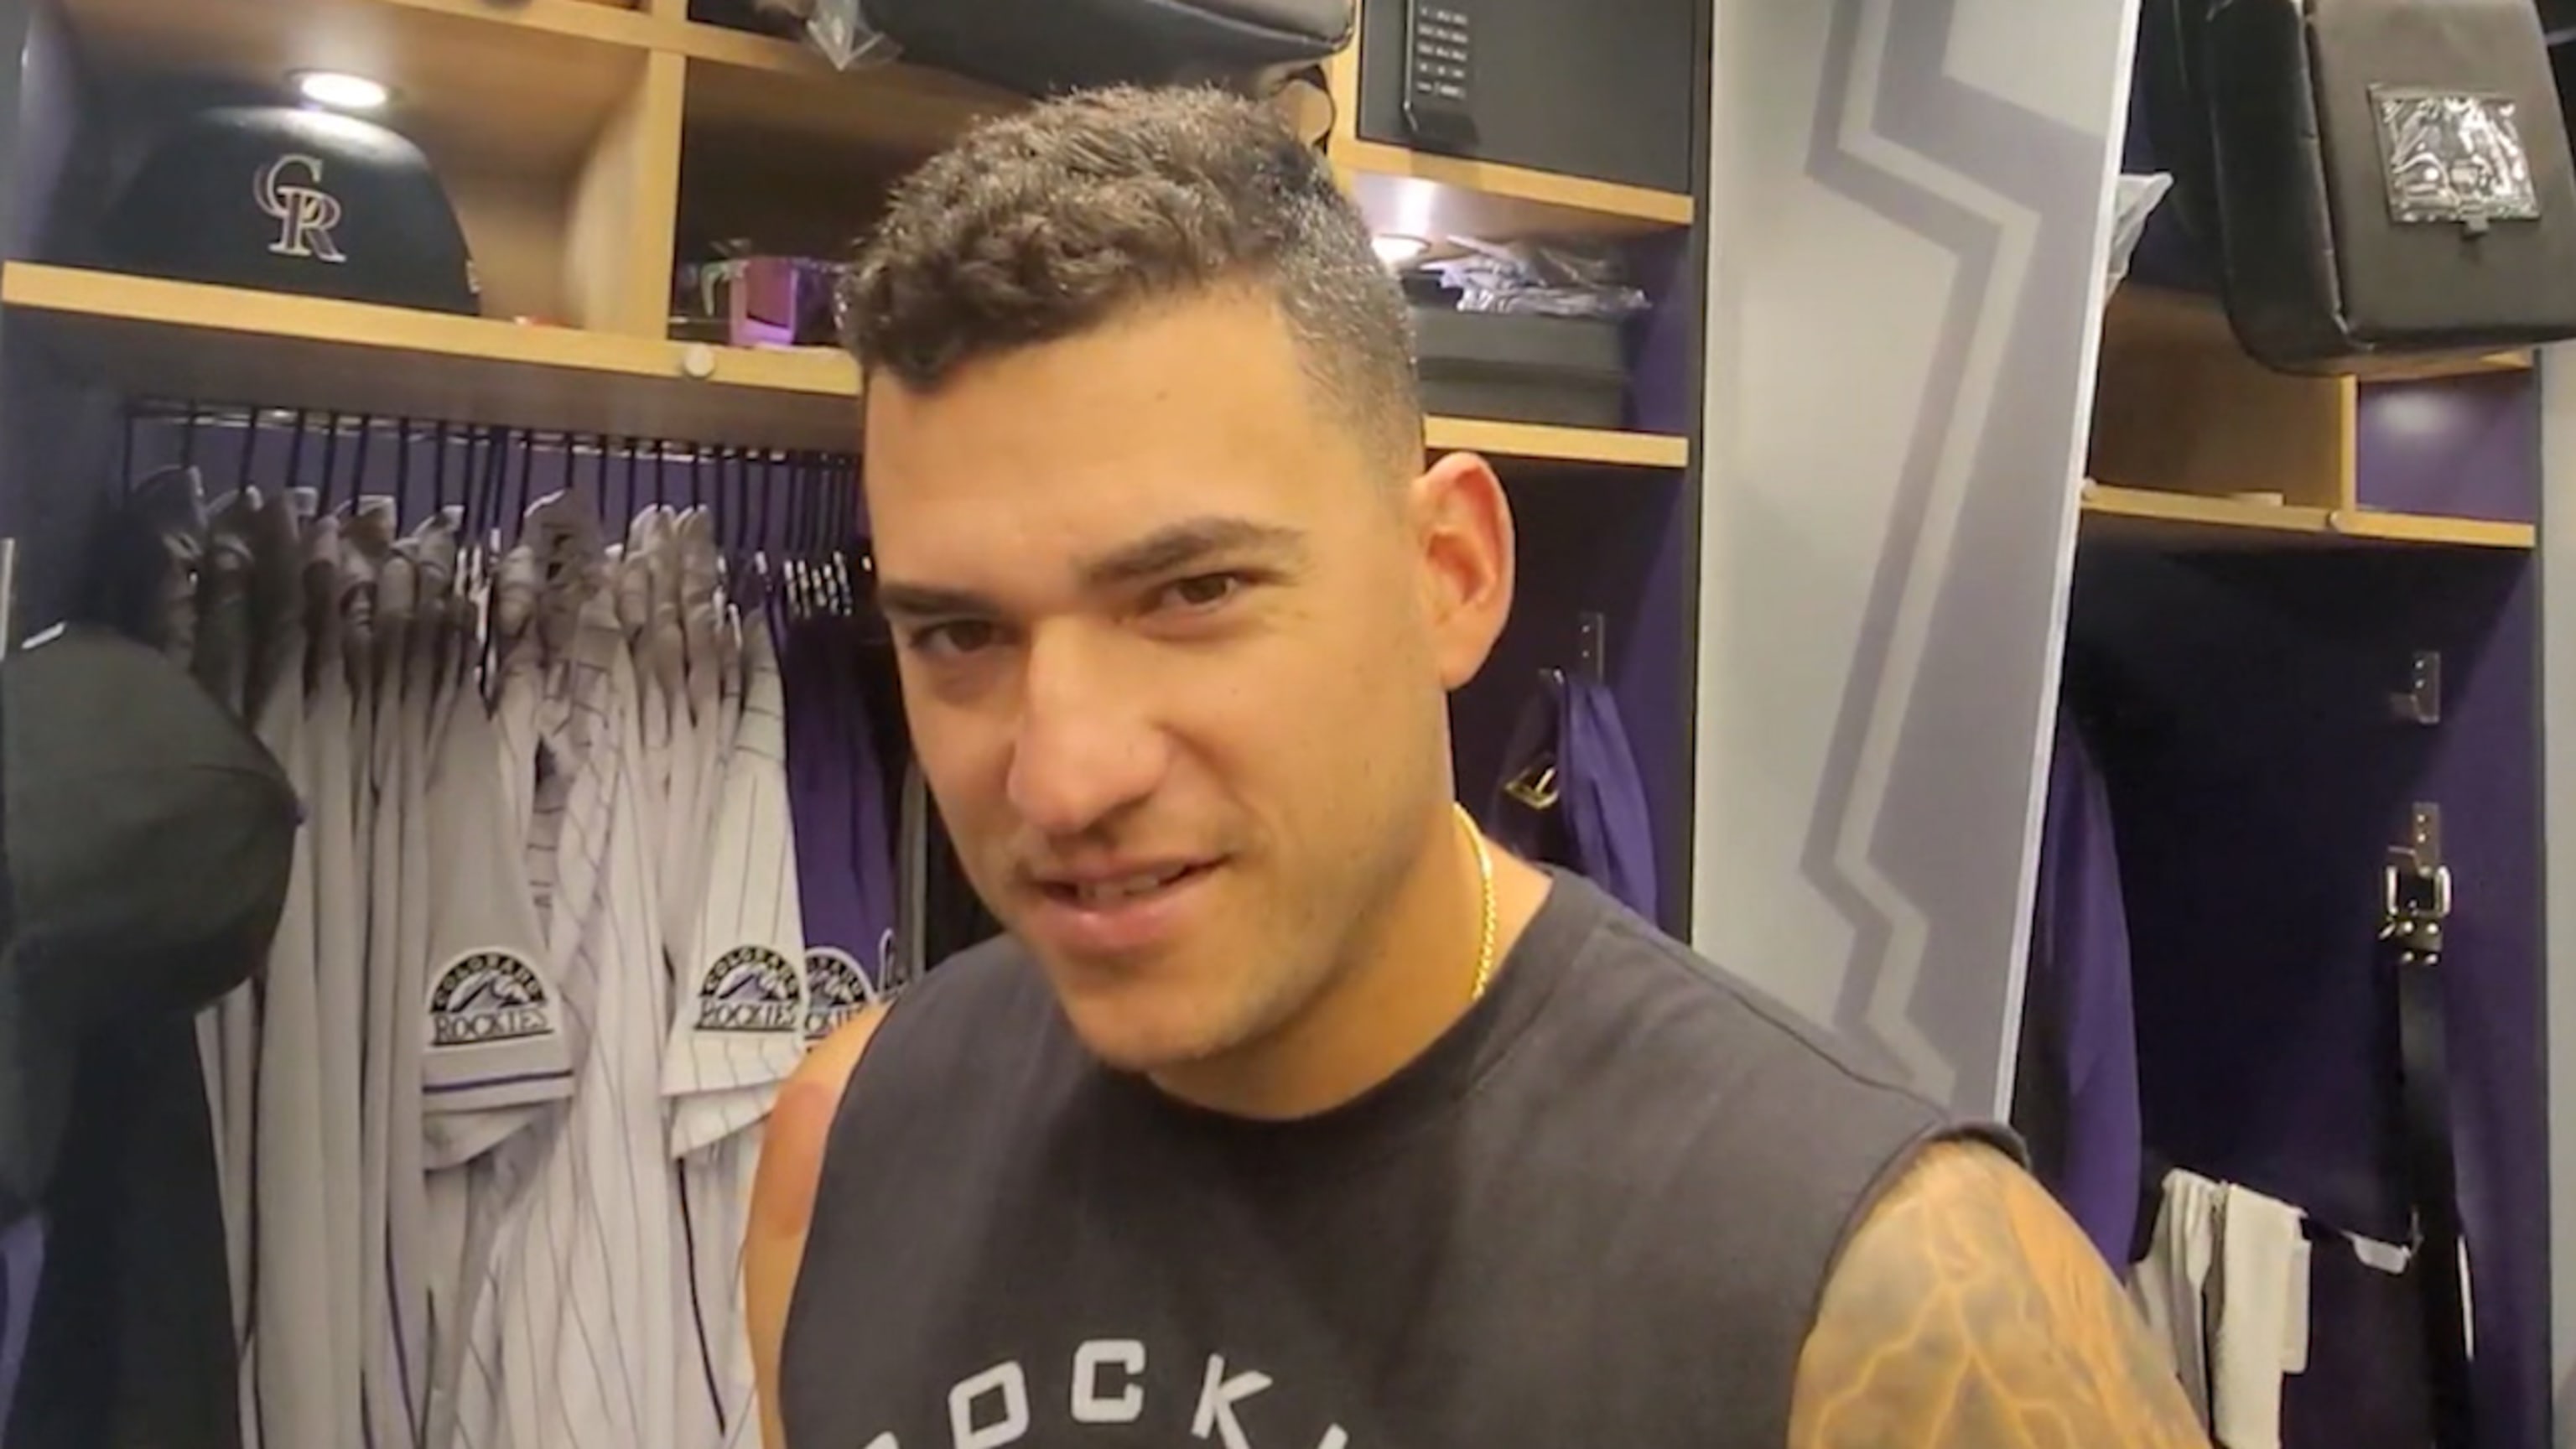 Rockies' Jose Iglesias honors his father with base hit and tears